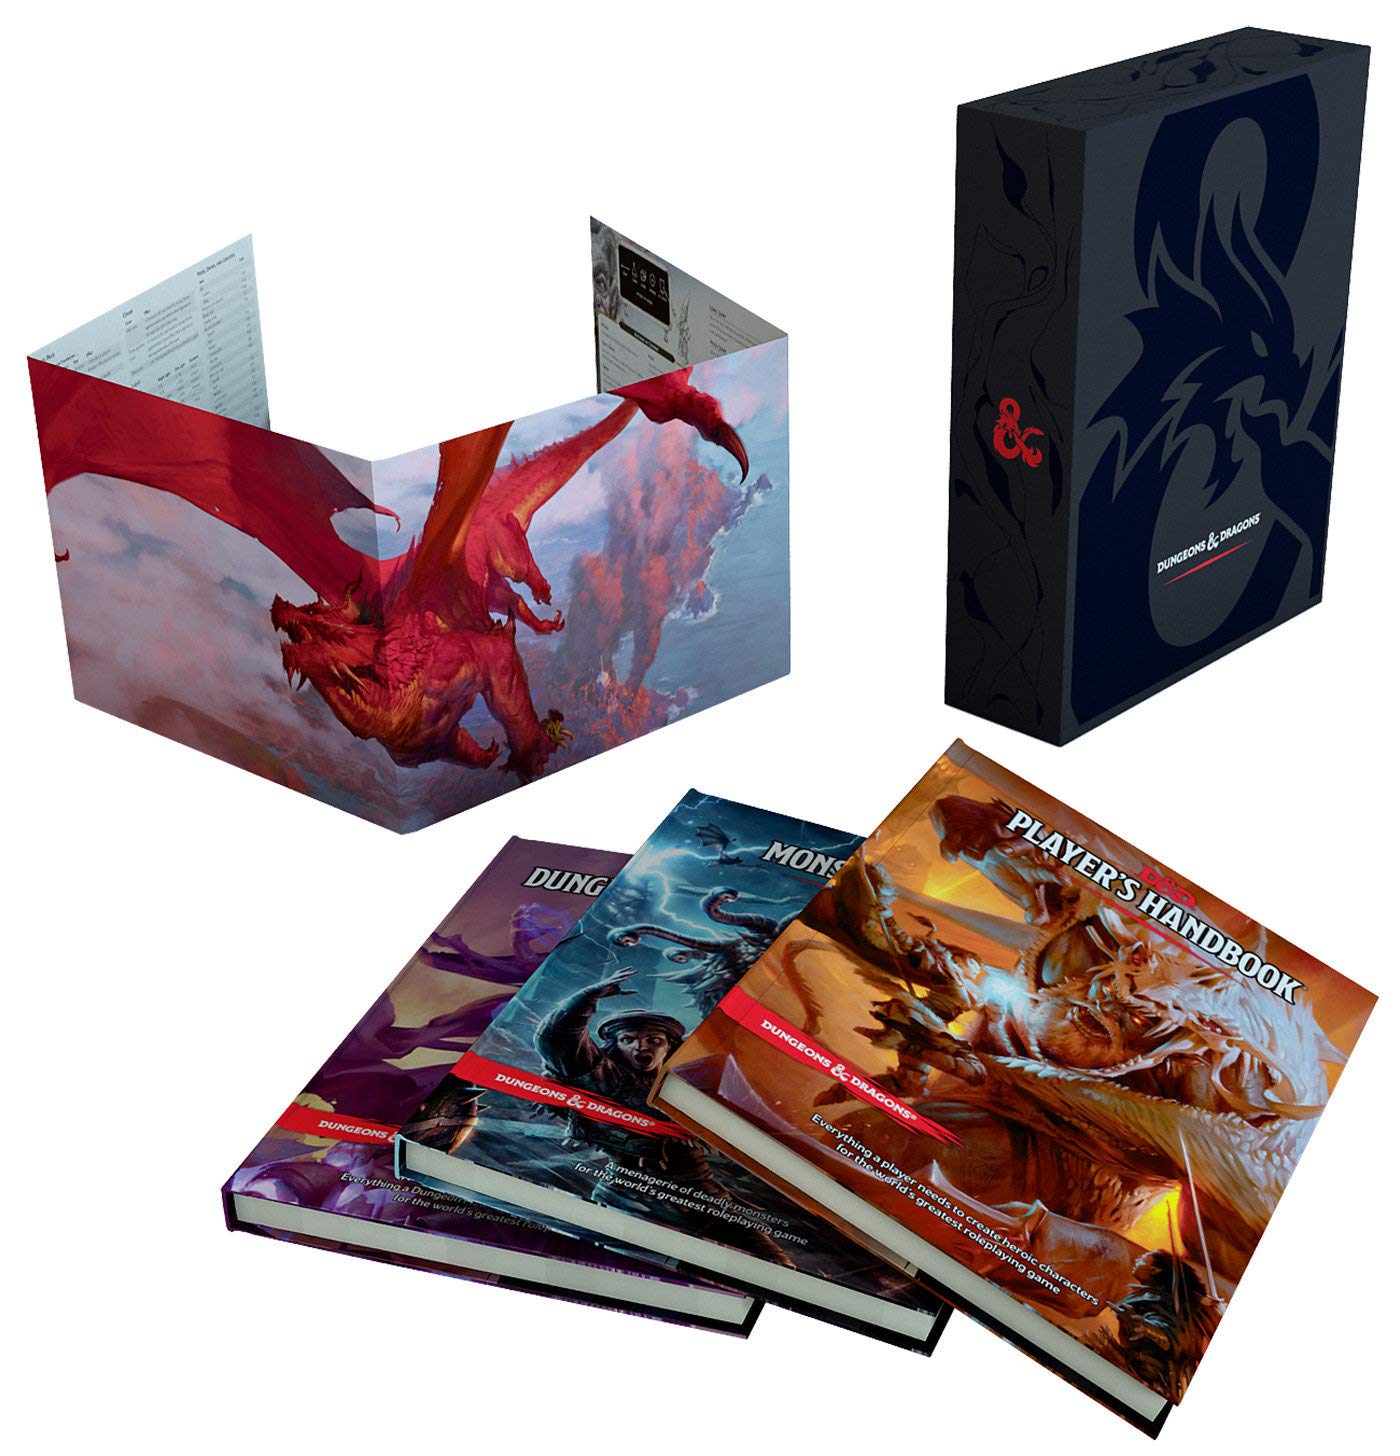 Dungeons and Dragons : Core Rulebooks Gift Set (Special Foil Covers Edition with Slipcase, Player's Handbook, Dungeon Master's Guide, Monster Manual, DM Screen)